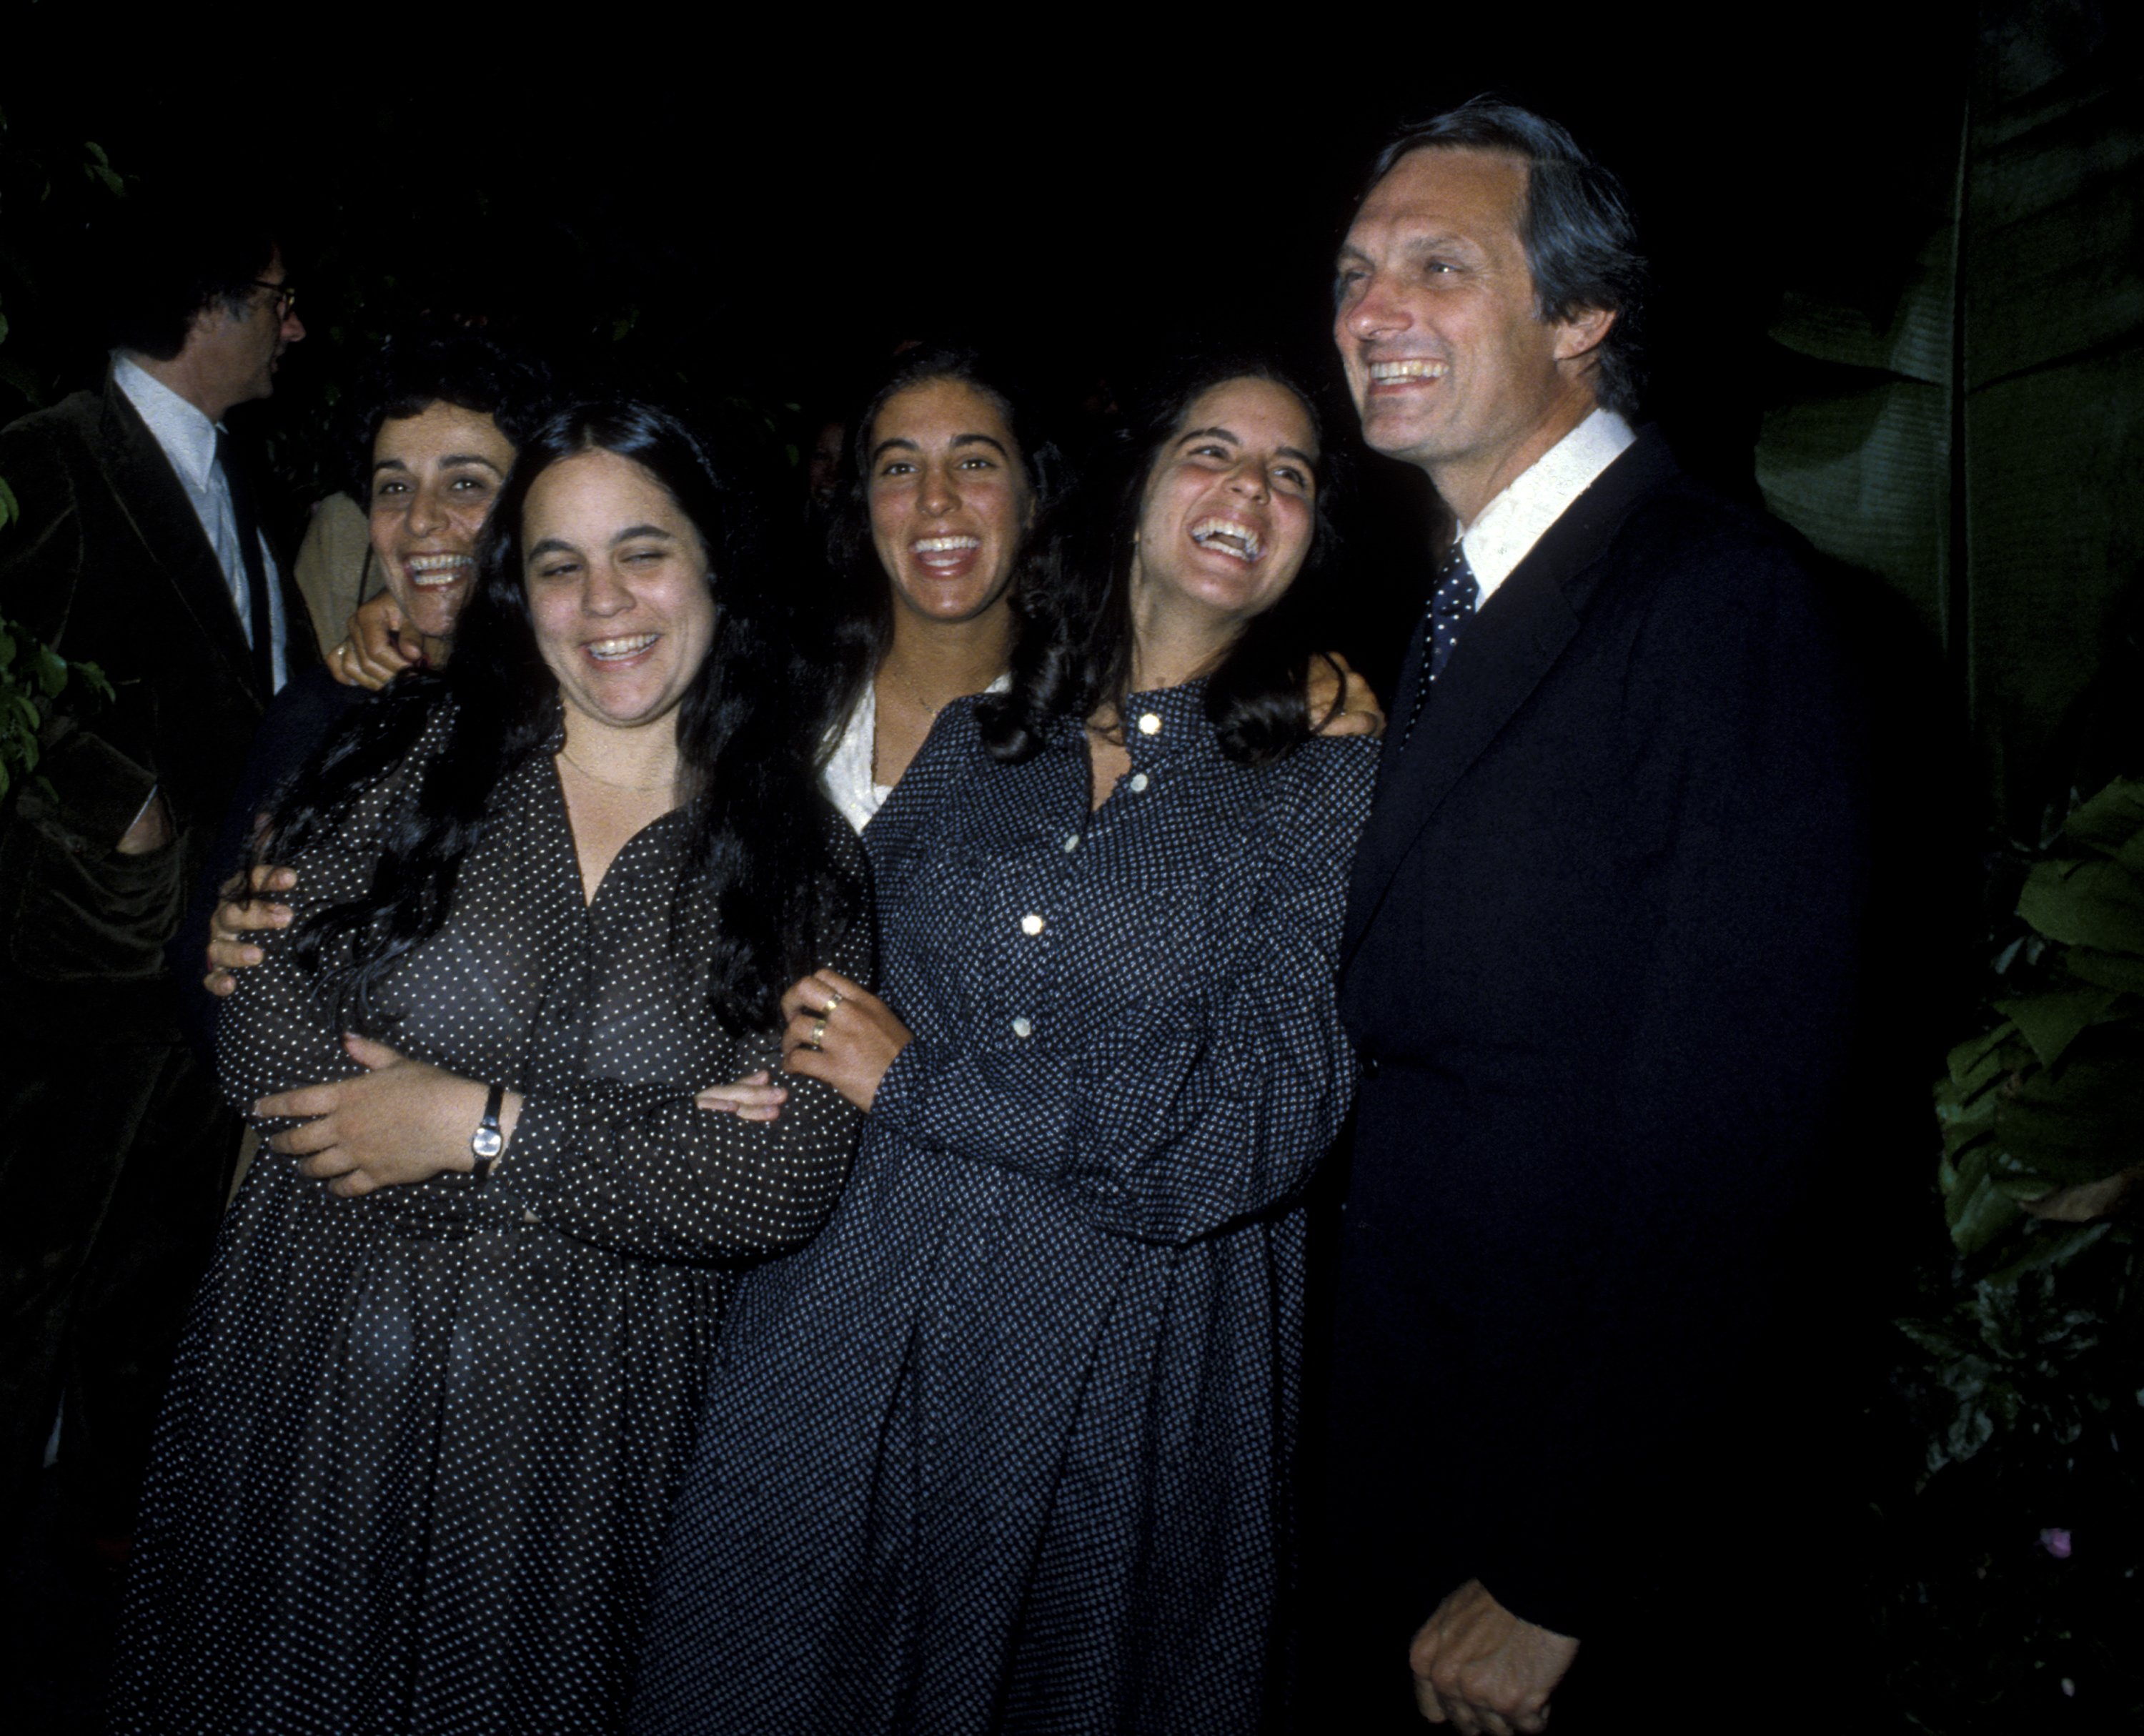 Alan Alda, wife Arlene Weiss and daughters Elizabeth Alda, Eve Alda and Beatrice Alda attend 19th Birthday Party for Elizabeth Alda on August 15, 1979 at the Promenade Cafe in New York City | Source: Getty Images